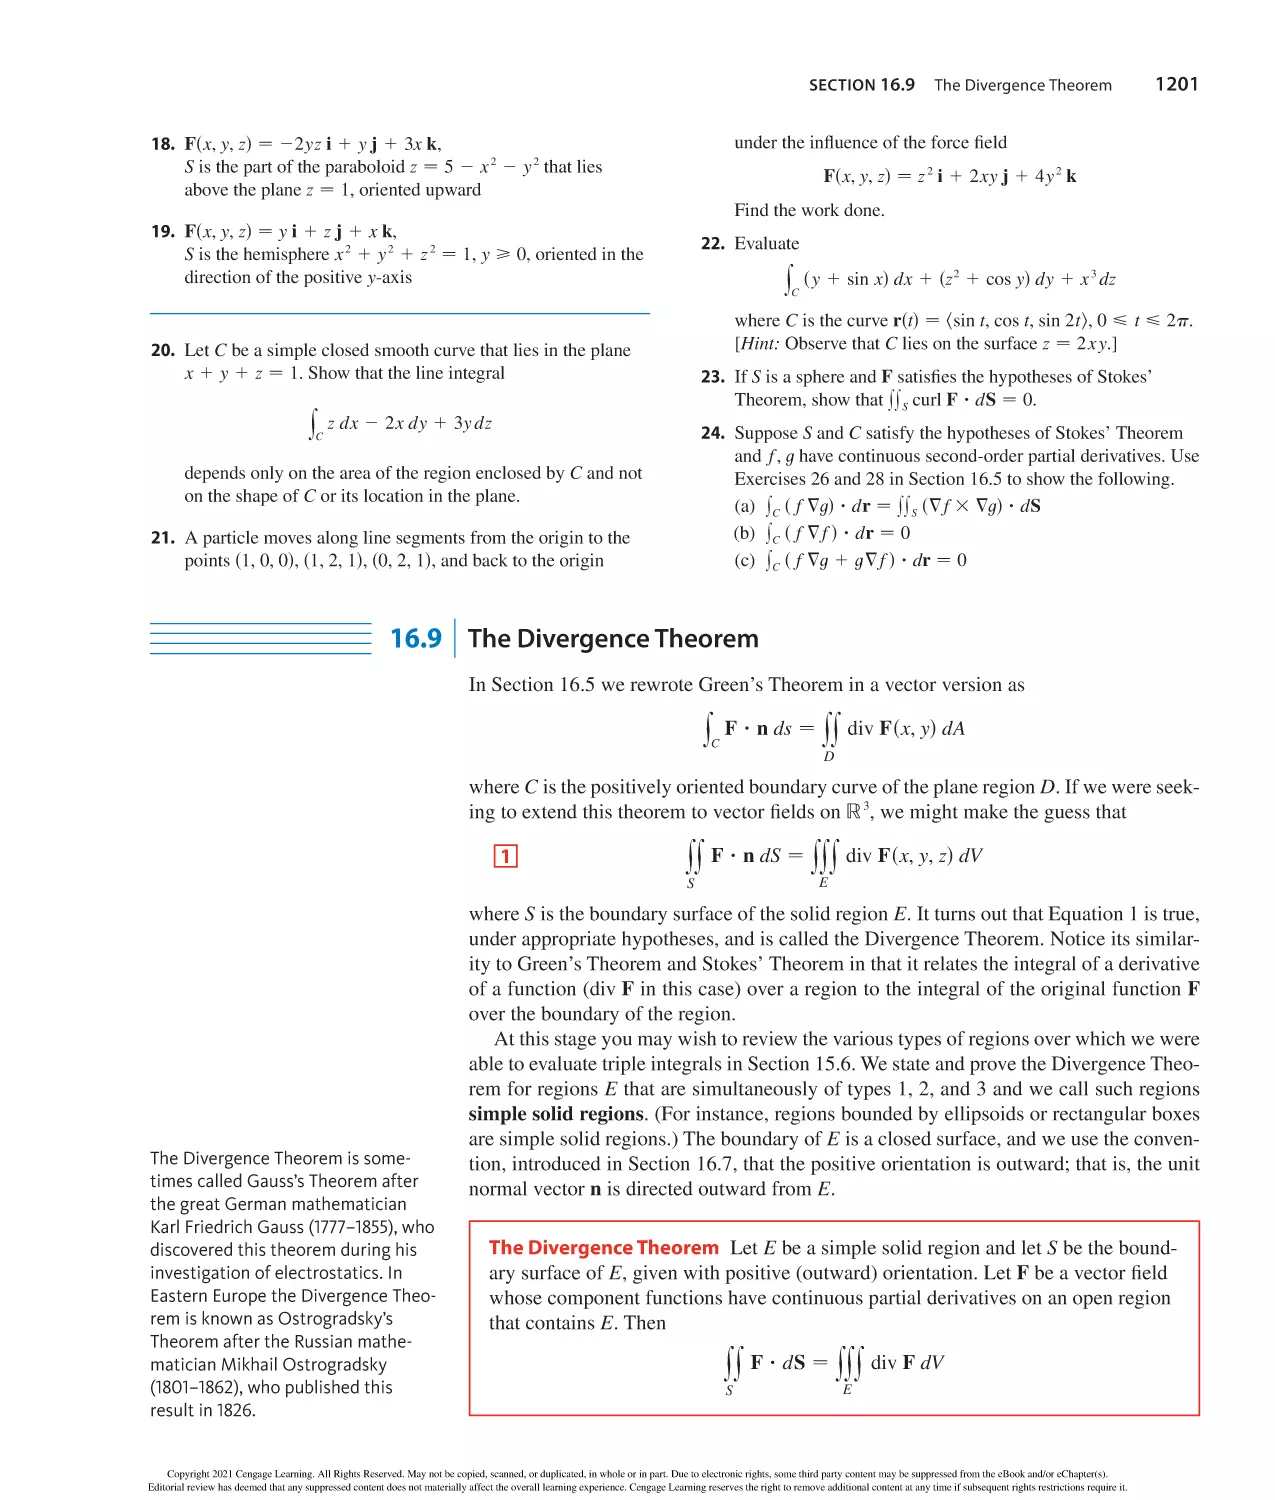 16.9 The Divergence Theorem